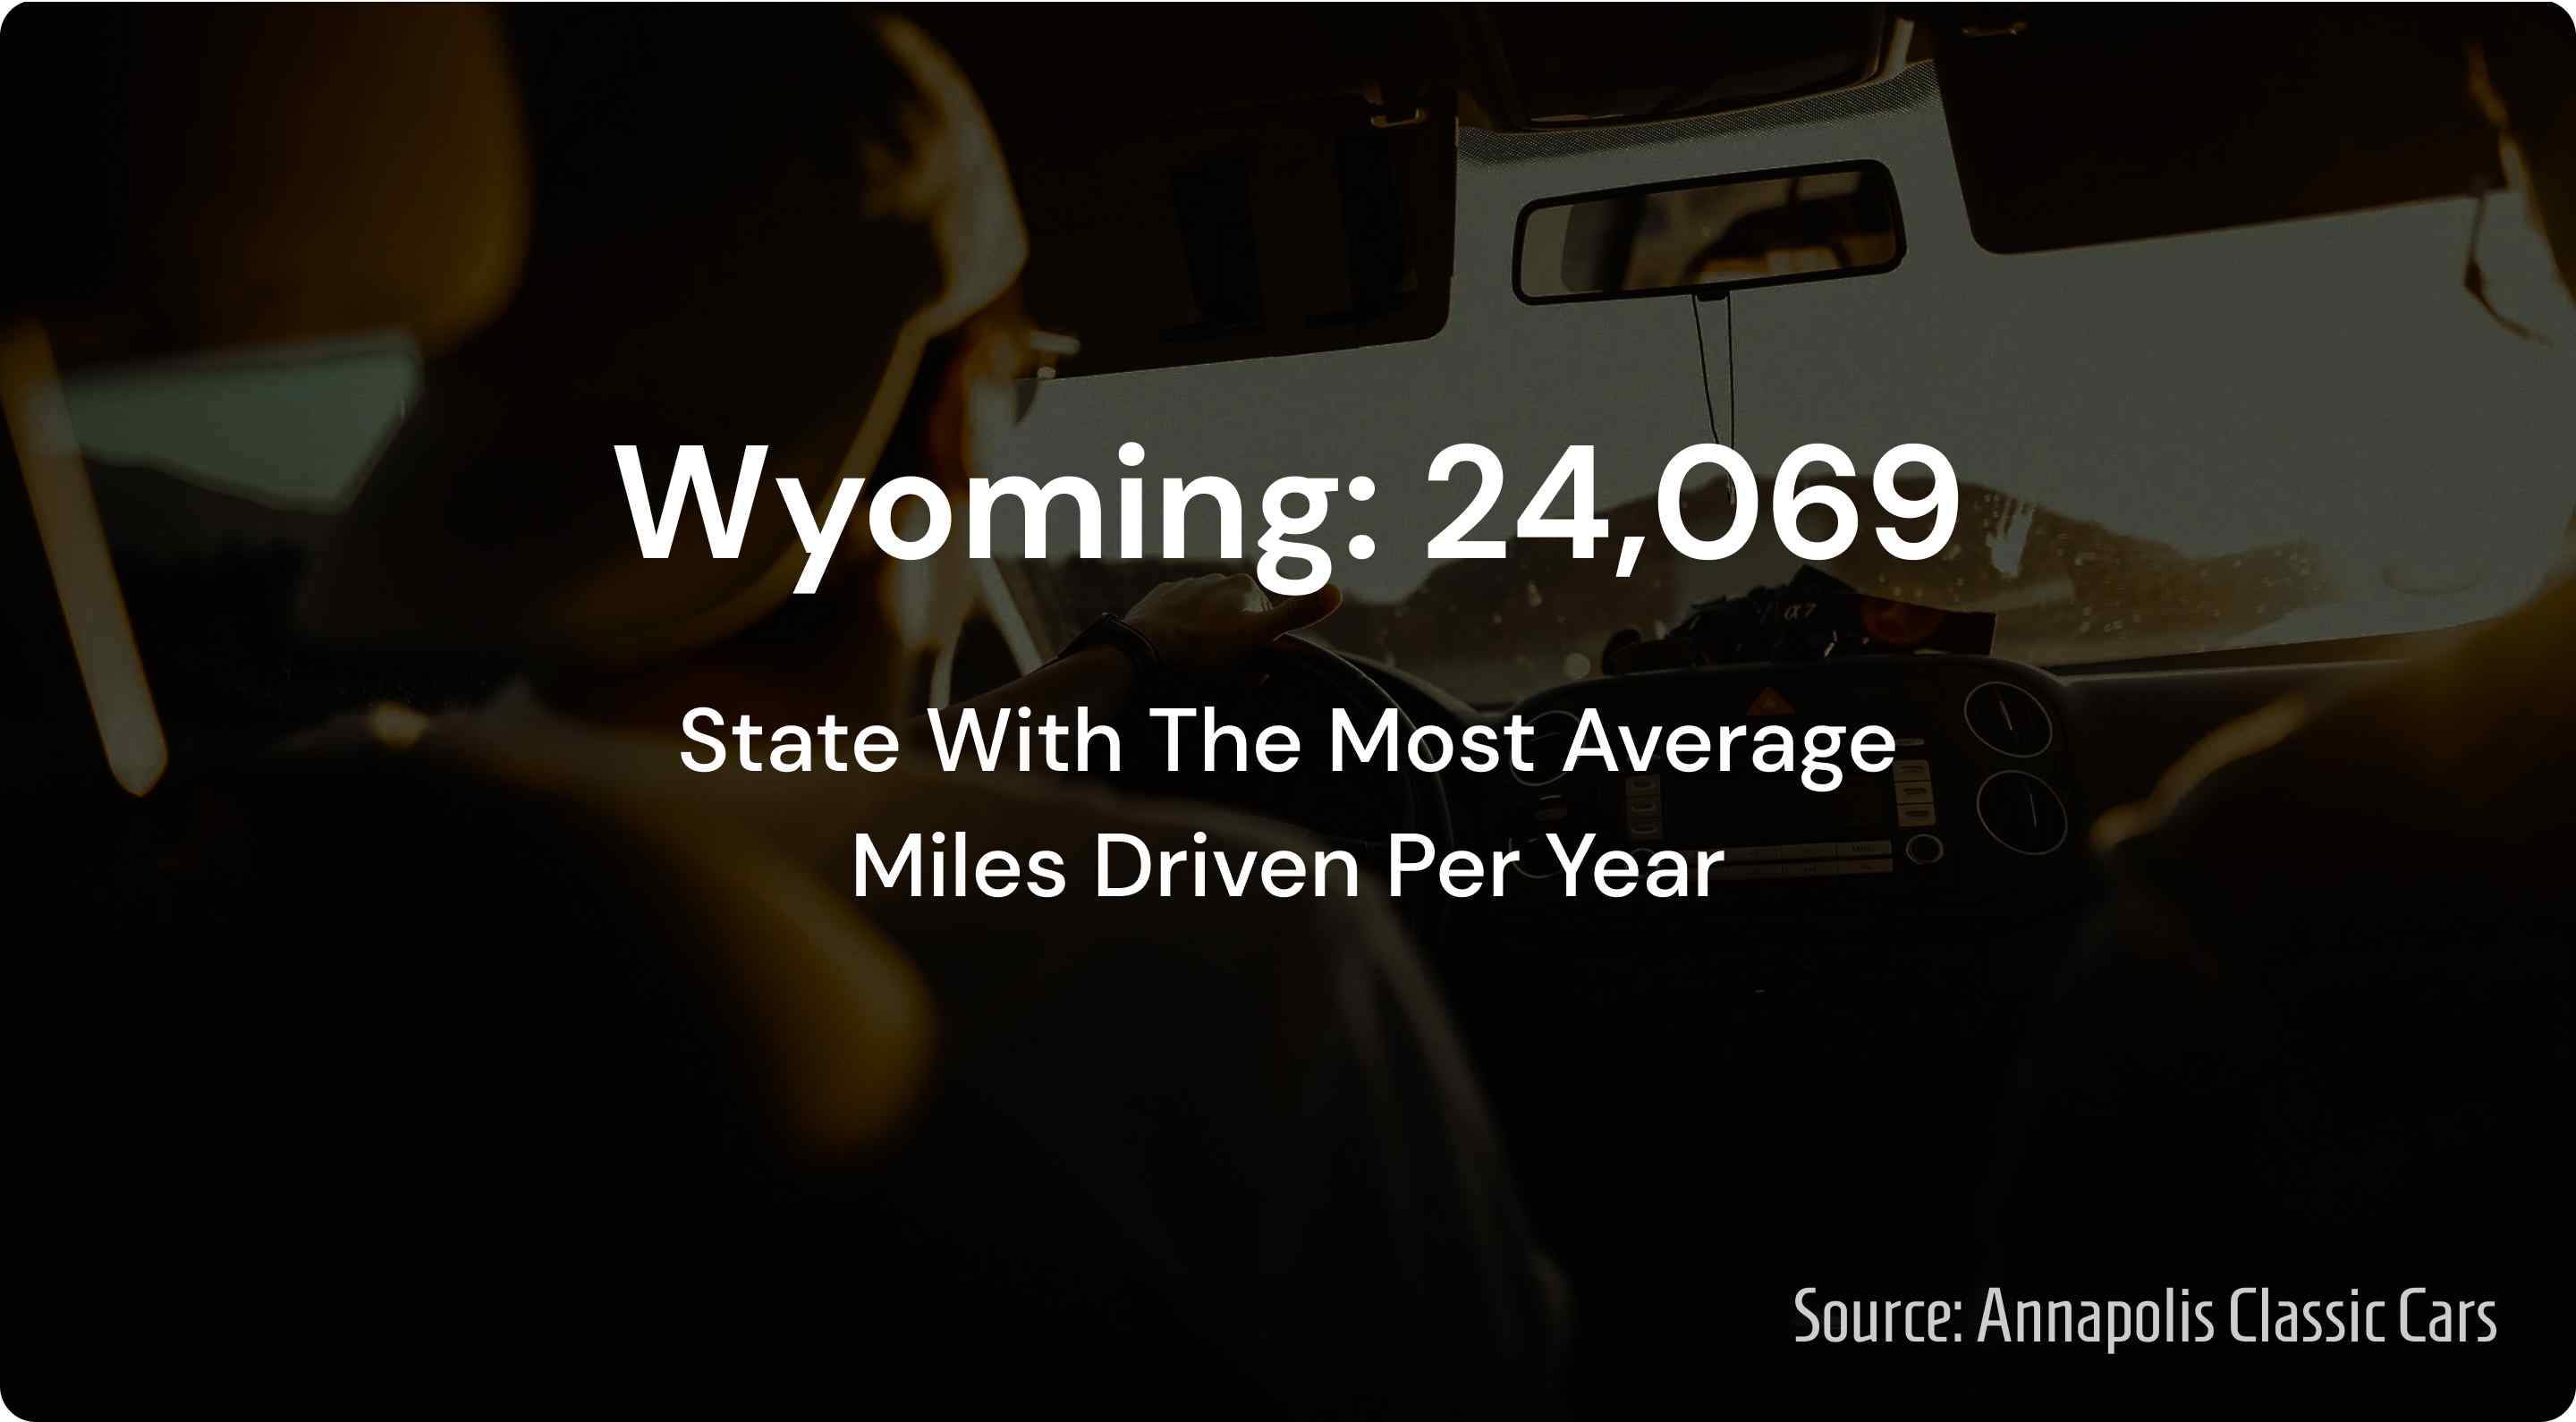 wyoming is the state with the most average miles driven per year